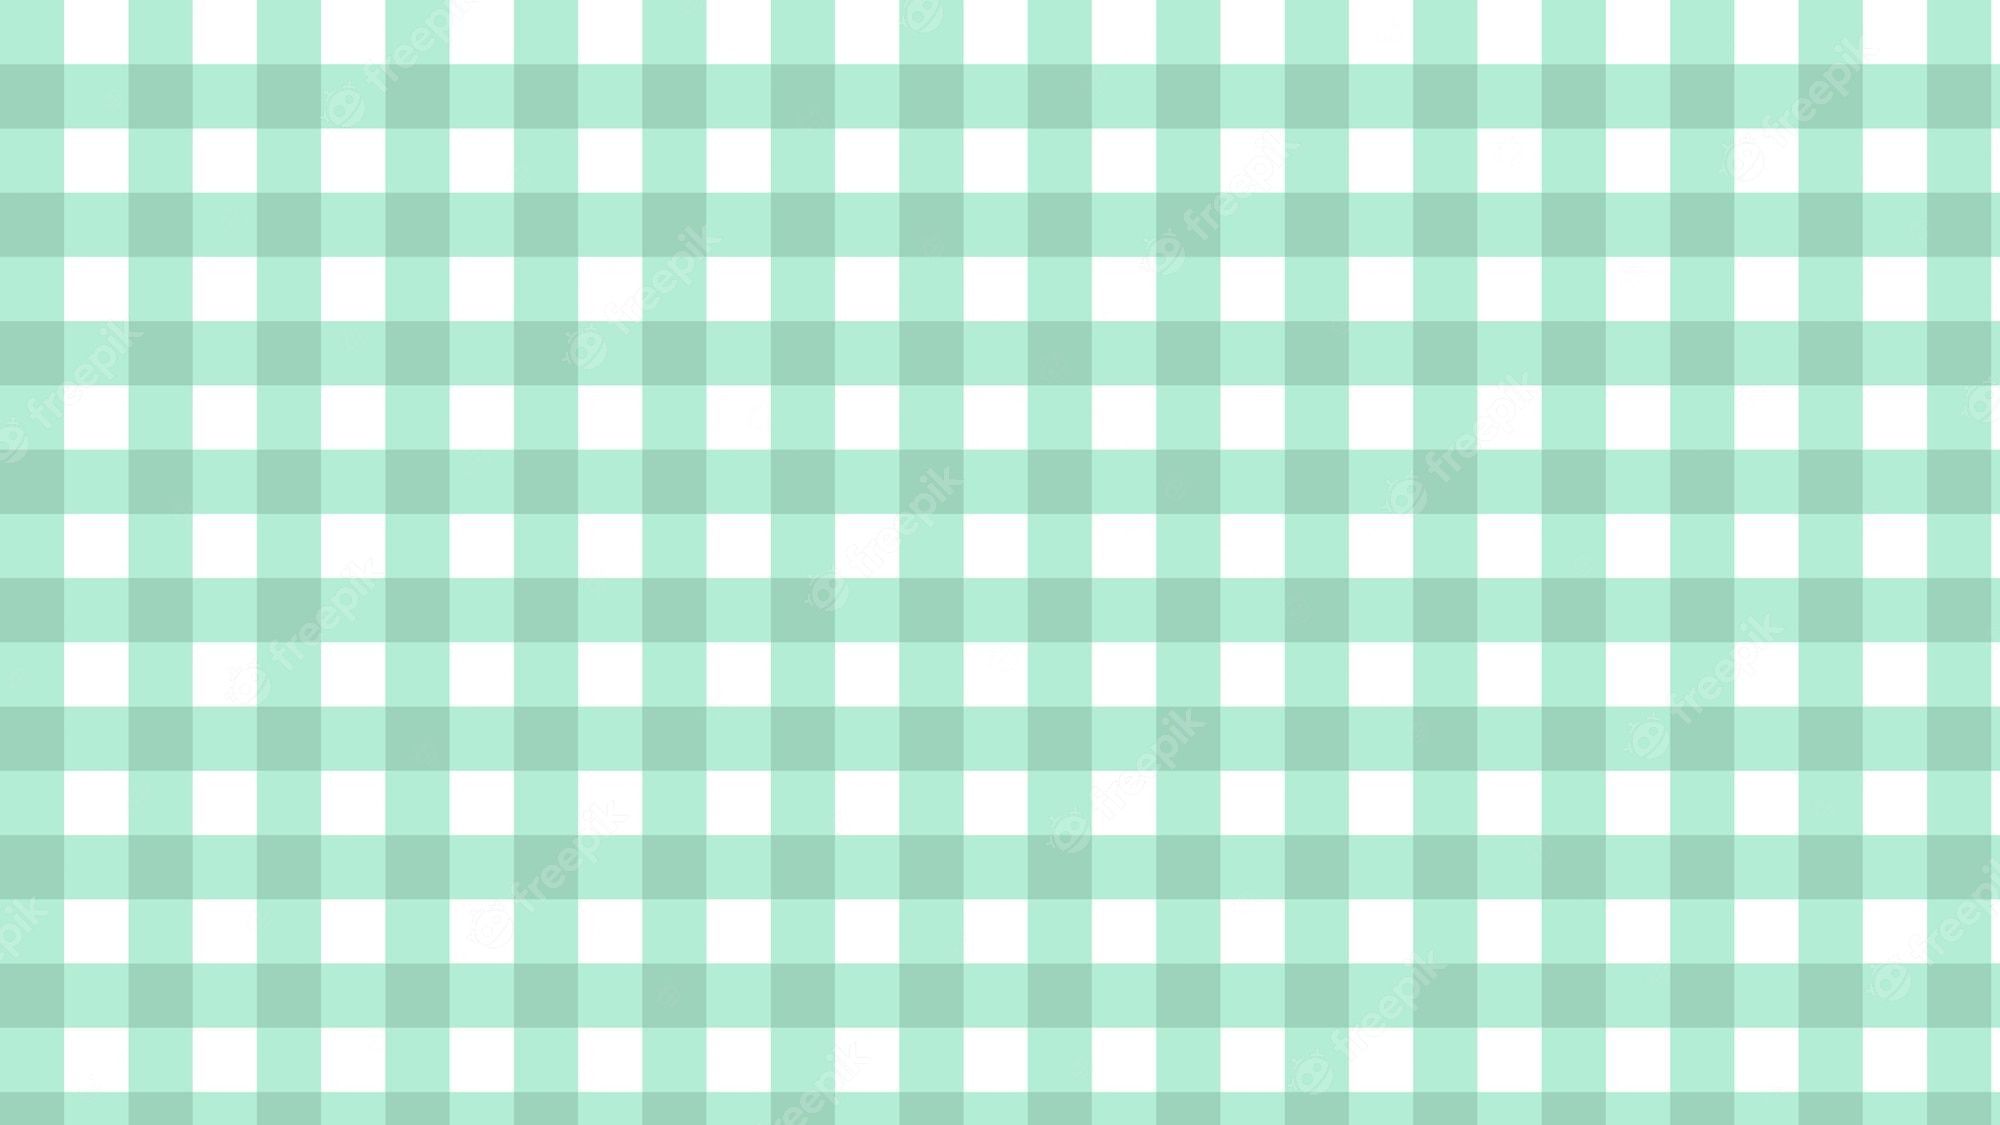 A green and white checkered pattern - Pastel green